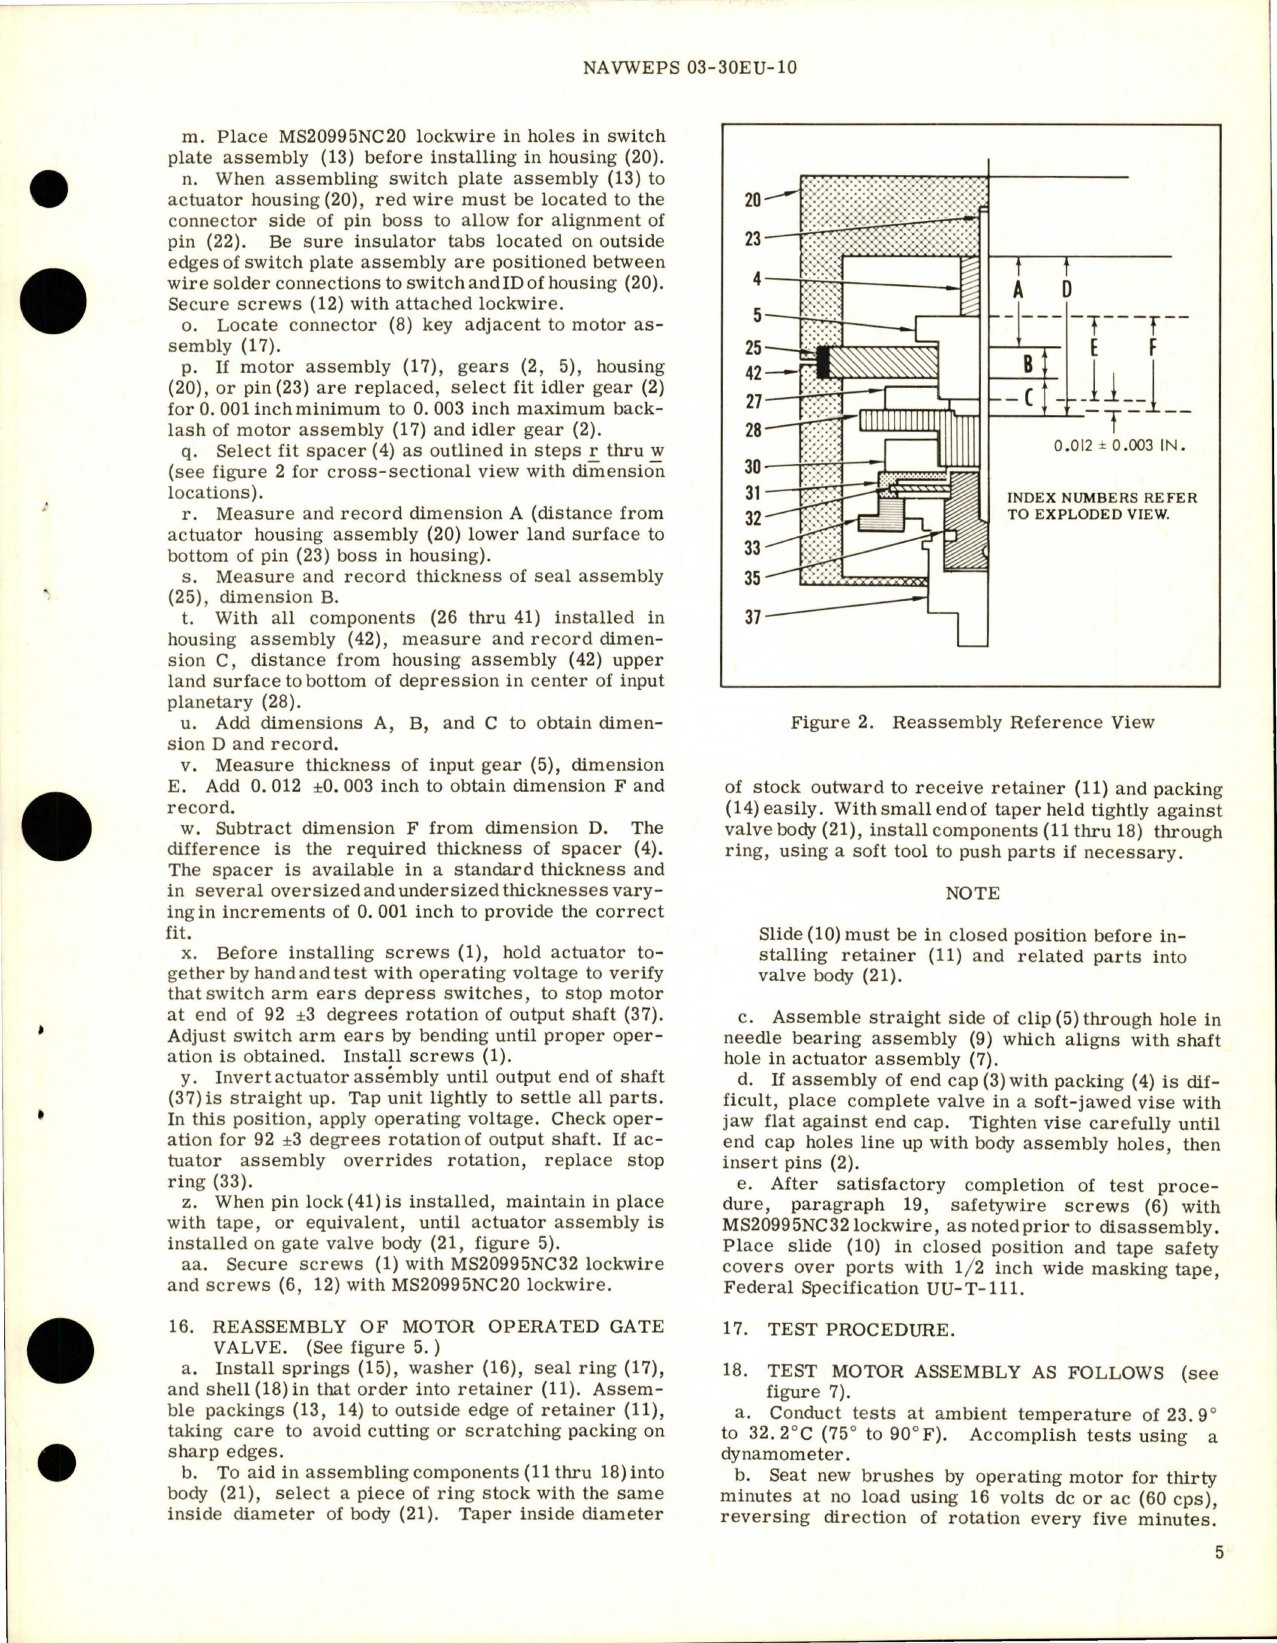 Sample page 7 from AirCorps Library document: Overhaul Instructions with Parts Breakdown for Motor Operated Gate Valve - Part AV16B1464C 